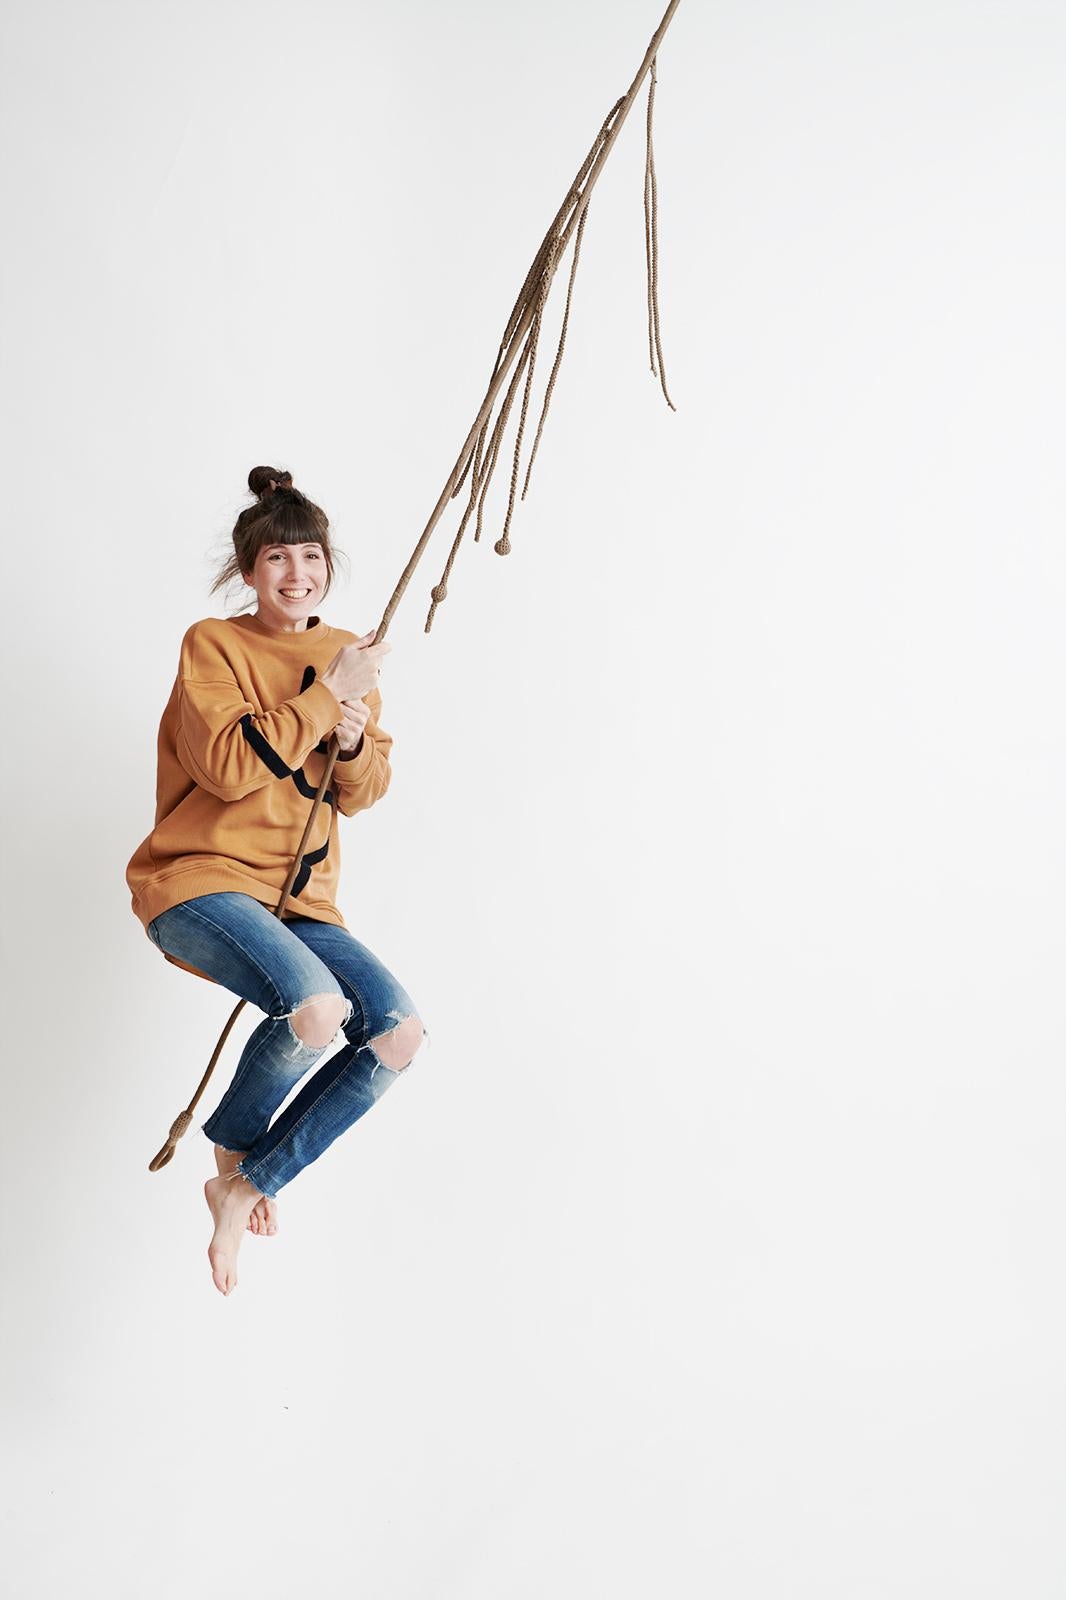 Let your little ones enjoy swinging on the IOTA Tarzan swing. Soaring through the air is super fun, makes you laugh and develops motor skills and balance. This stylish swing inspired by hanging vines will work great in kids' rooms, play areas or the